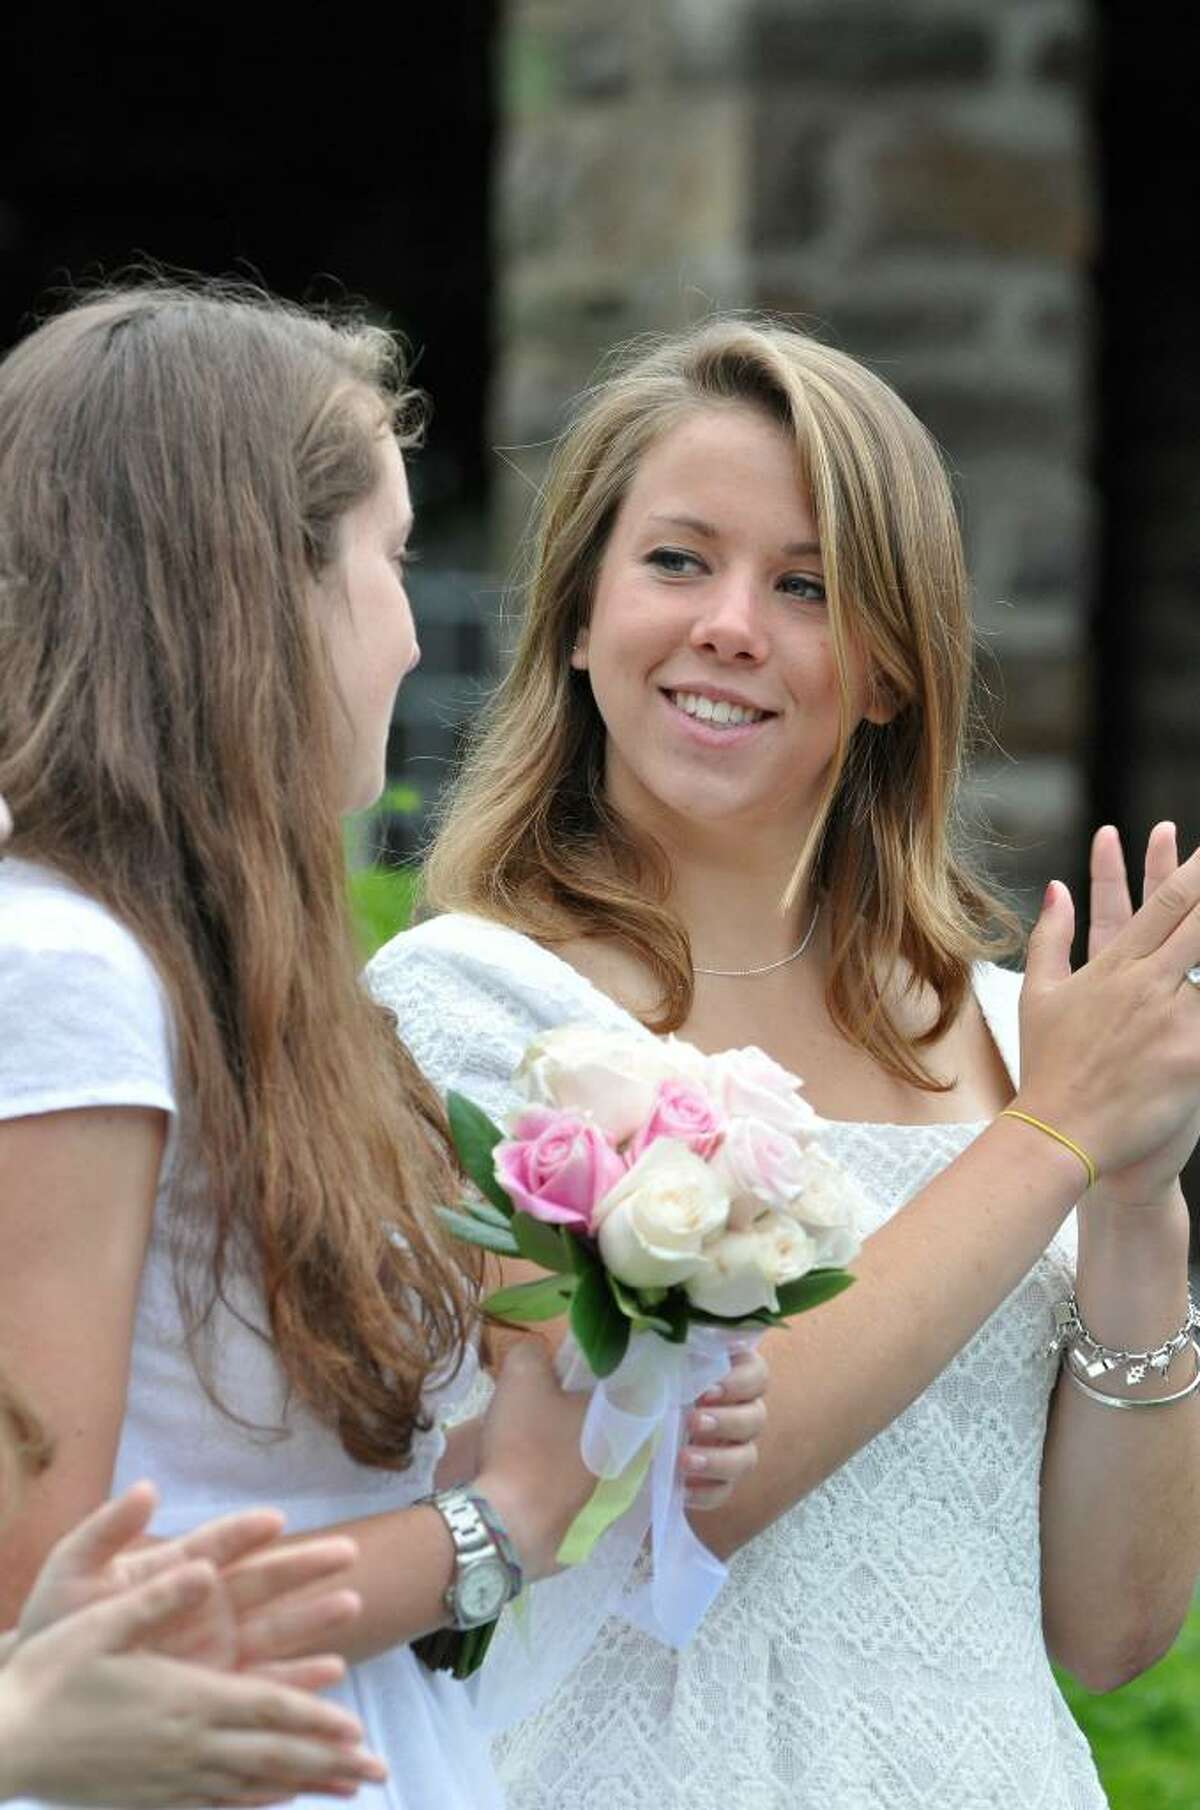 Grace Comann, of Fairfield, applauds during Greens Farms Academy eighty-fifth commencement on Thursday, June 10, 2010.